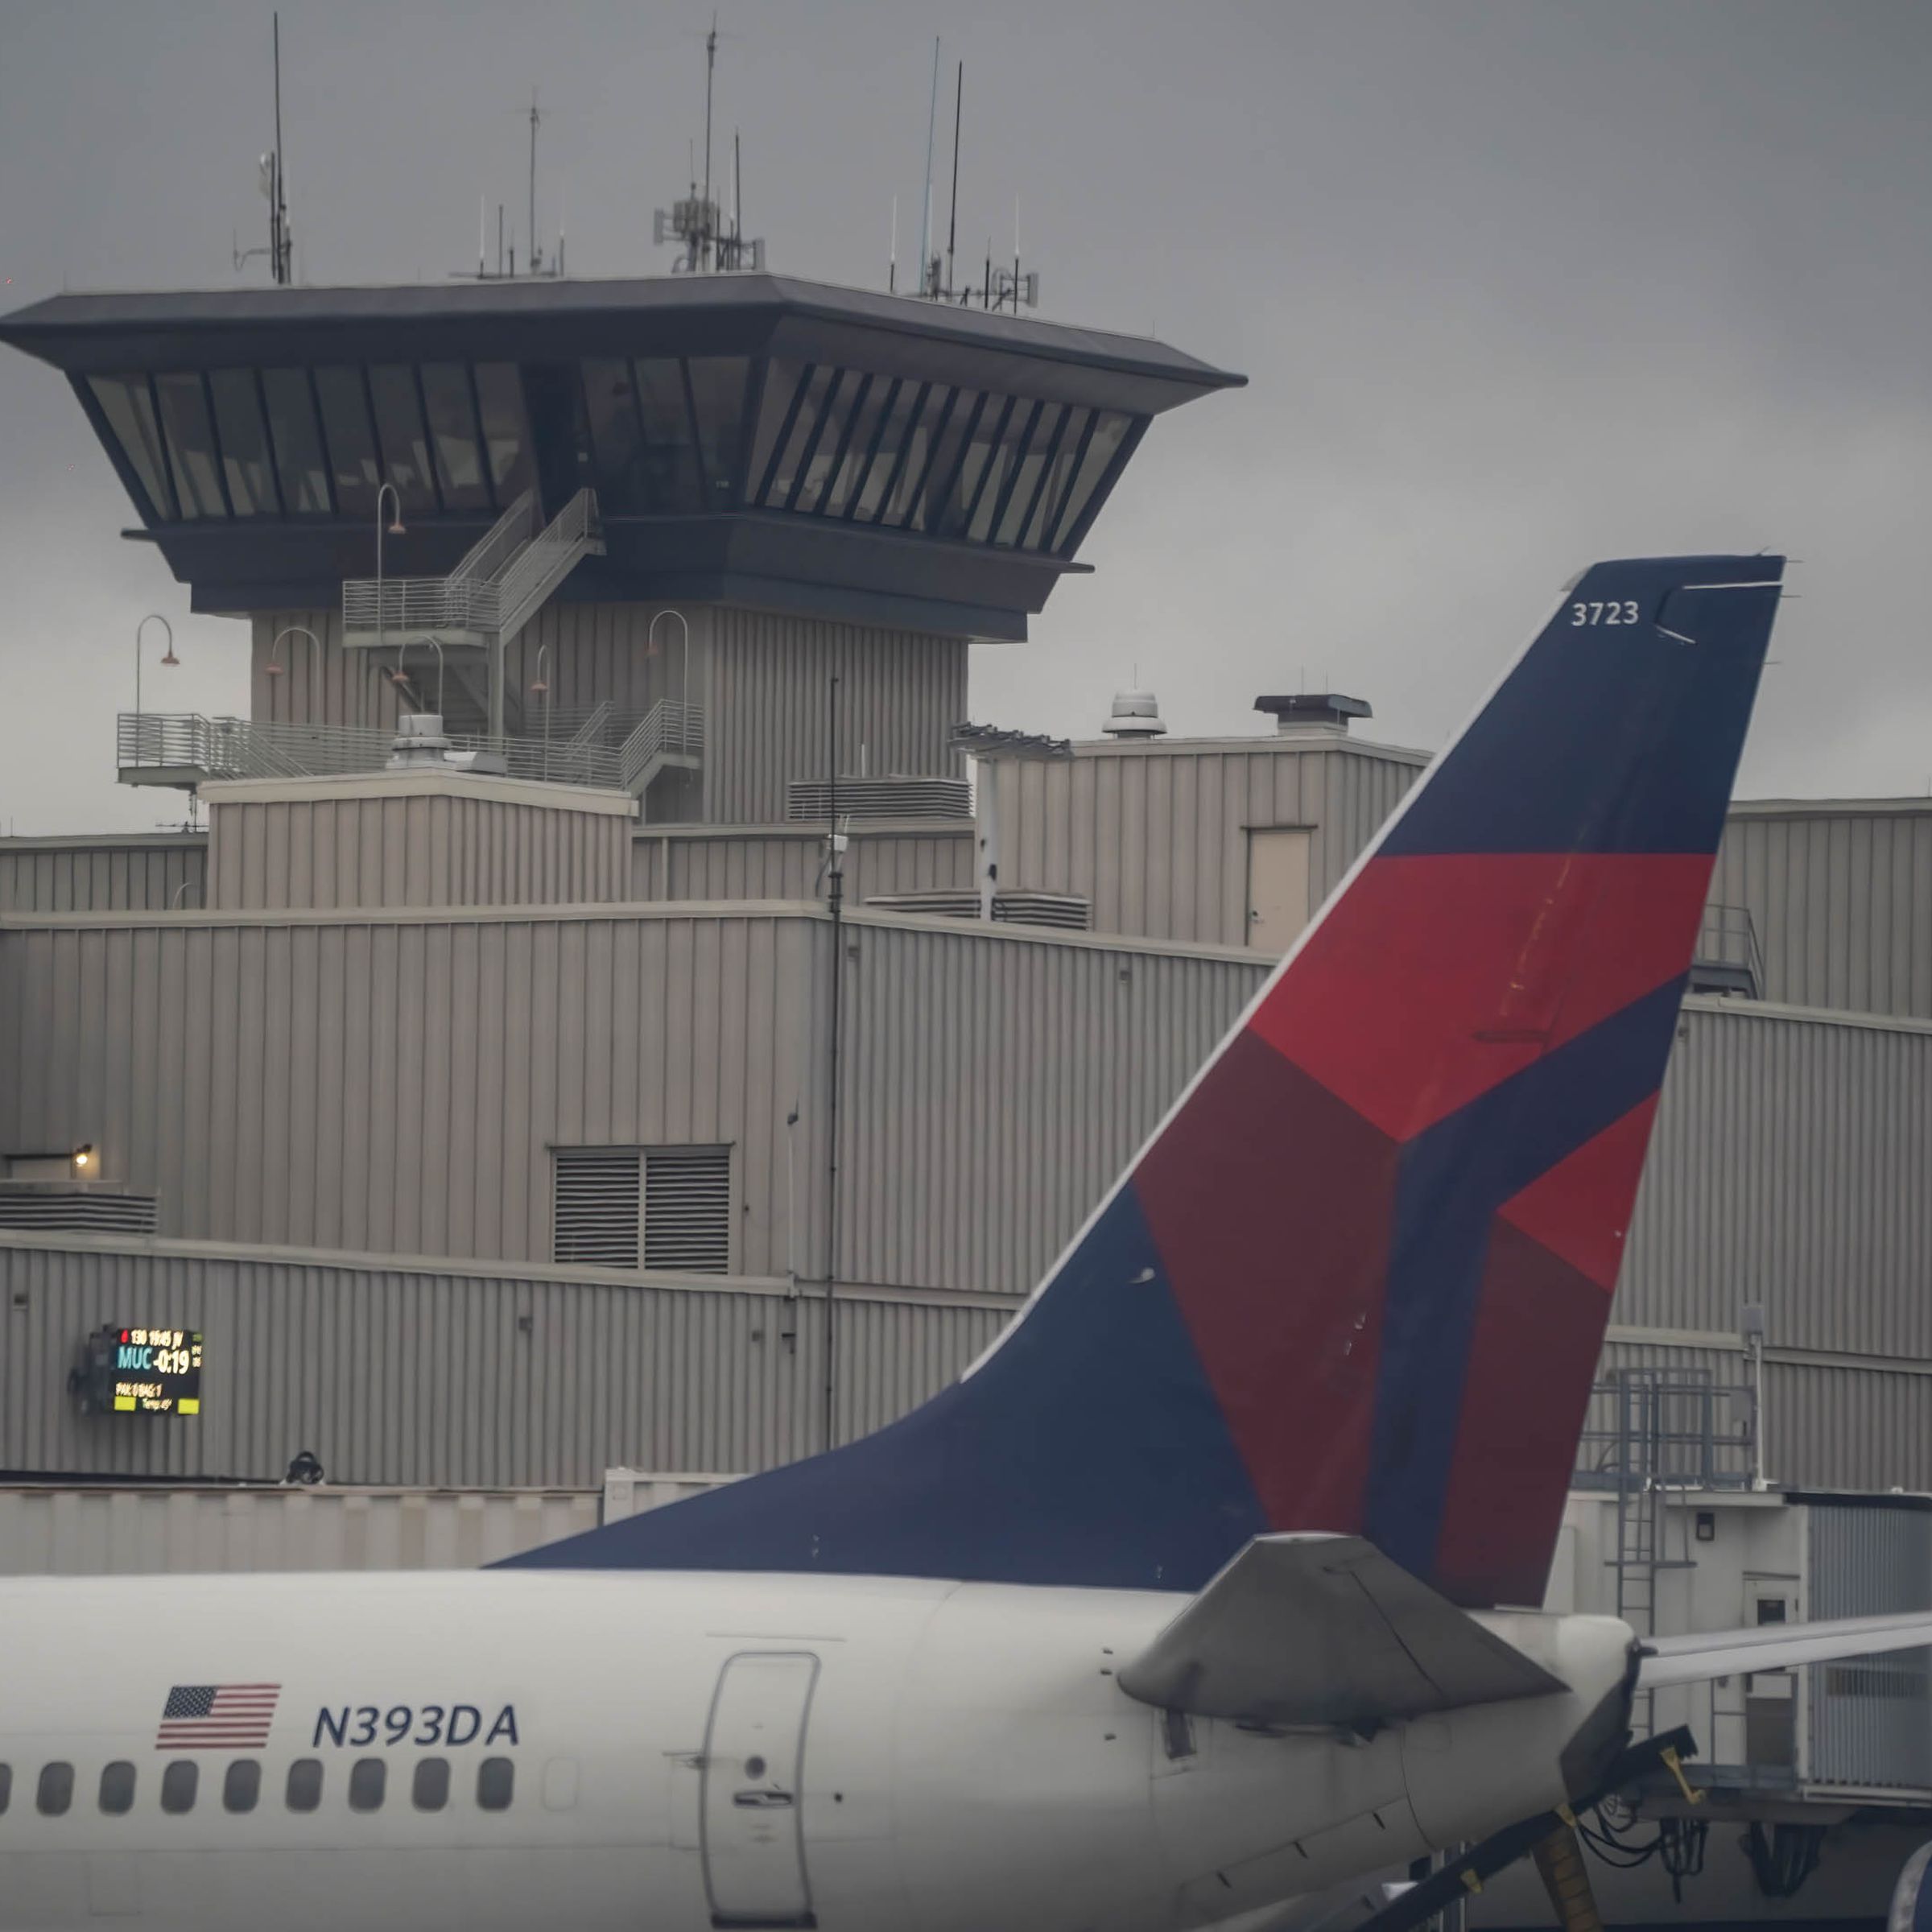 A Delta Air Lines airplane sits at an airport gate.